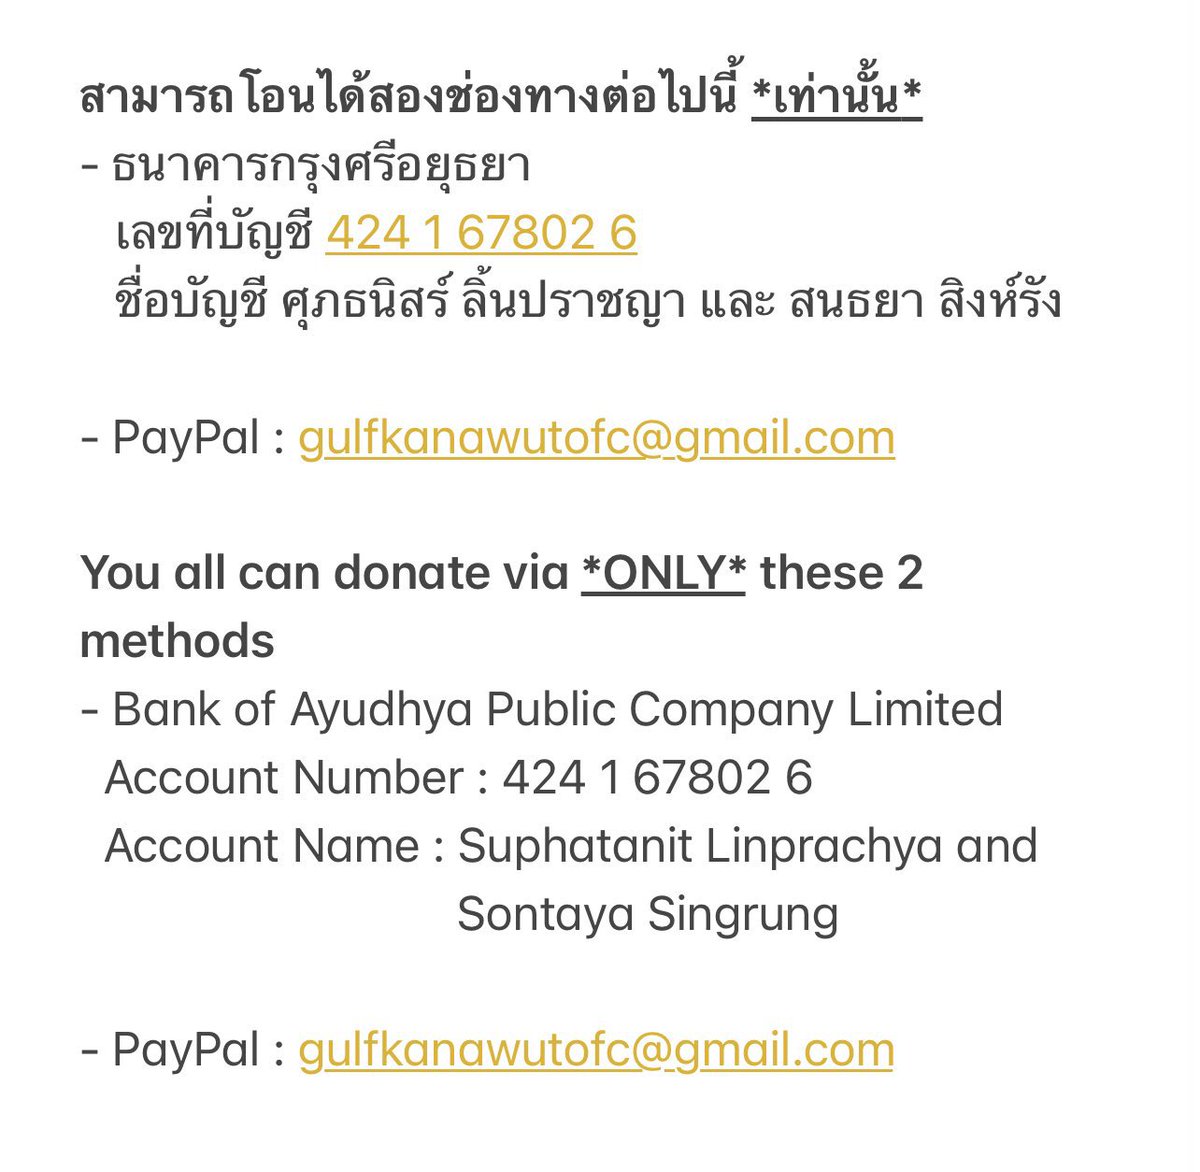 GKOFC  @Gulfkanawutofc added paypal for donation method :)You can donate in their provided paypal acc or any of those bank accs directly if you can  #ลูกบอลของคุณบิ๊กกลัฟ  #PhiBalls  #หวานใจมิวกลัฟ https://twitter.com/gulfkanawutofc/status/1387782832223756293?s=21